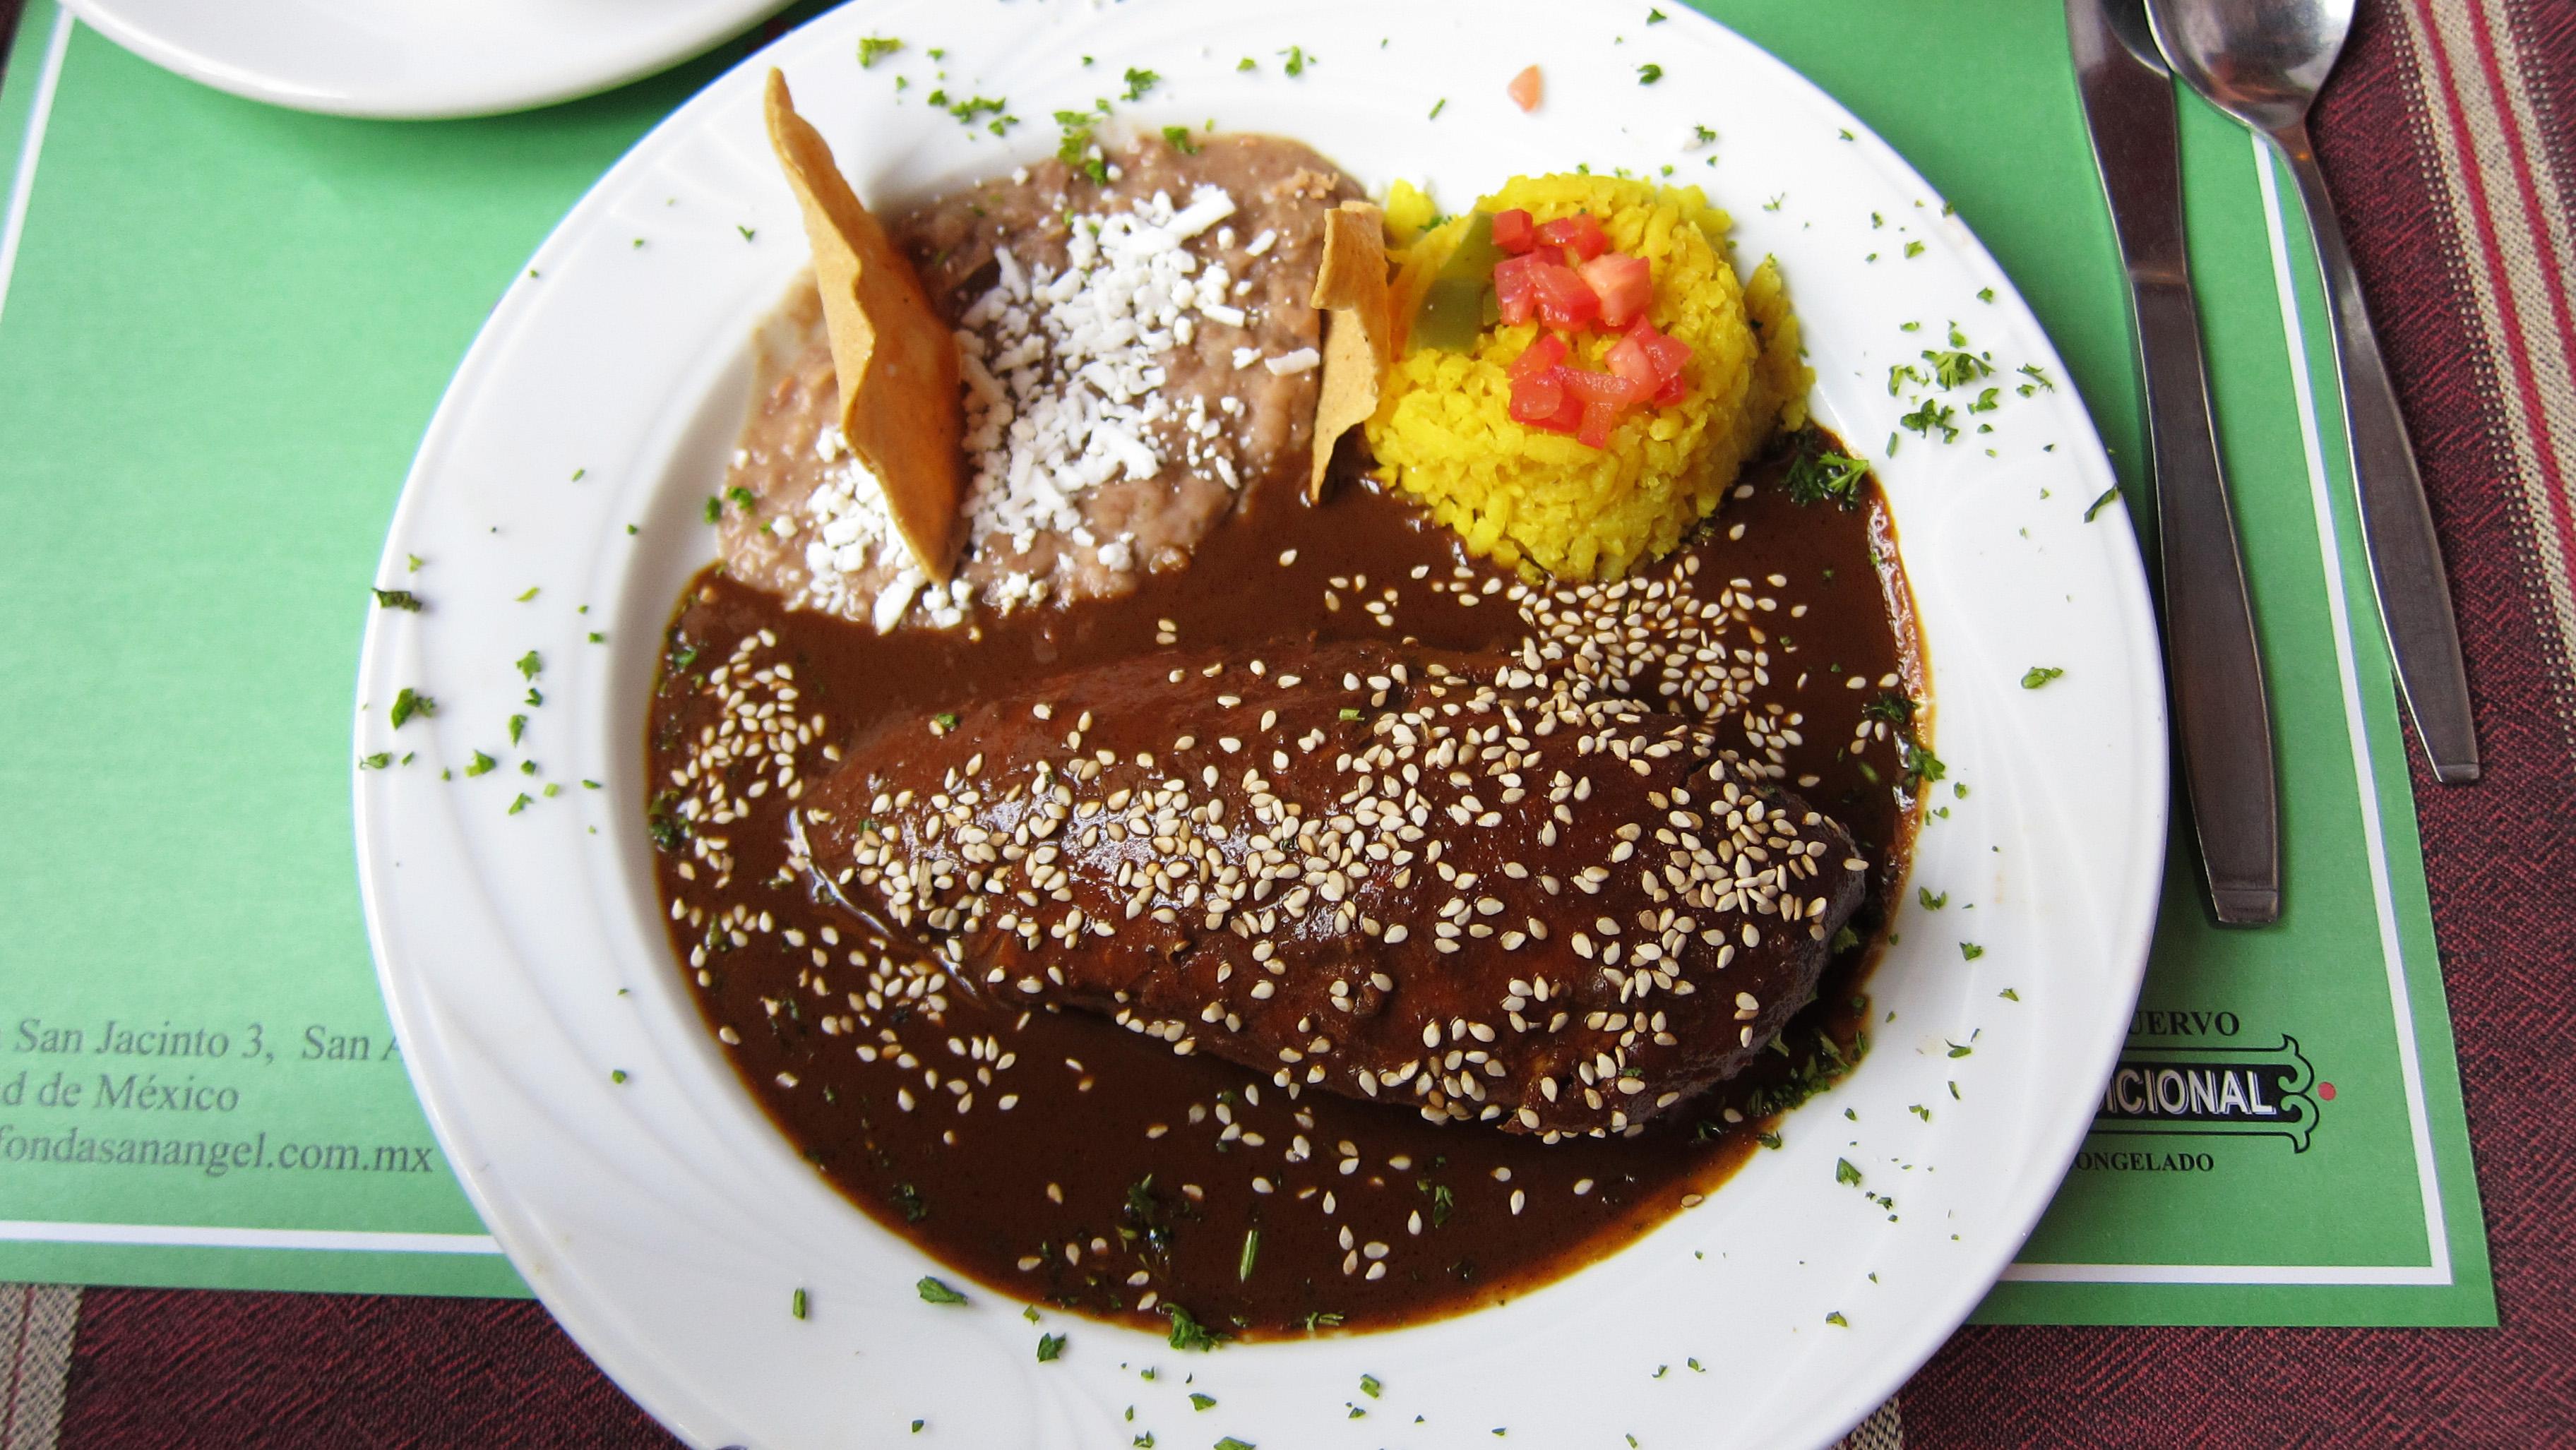 Chicken mole is just one way mole is used in traditional Mexican cuisine. (Jeff Kramer / Flickr)